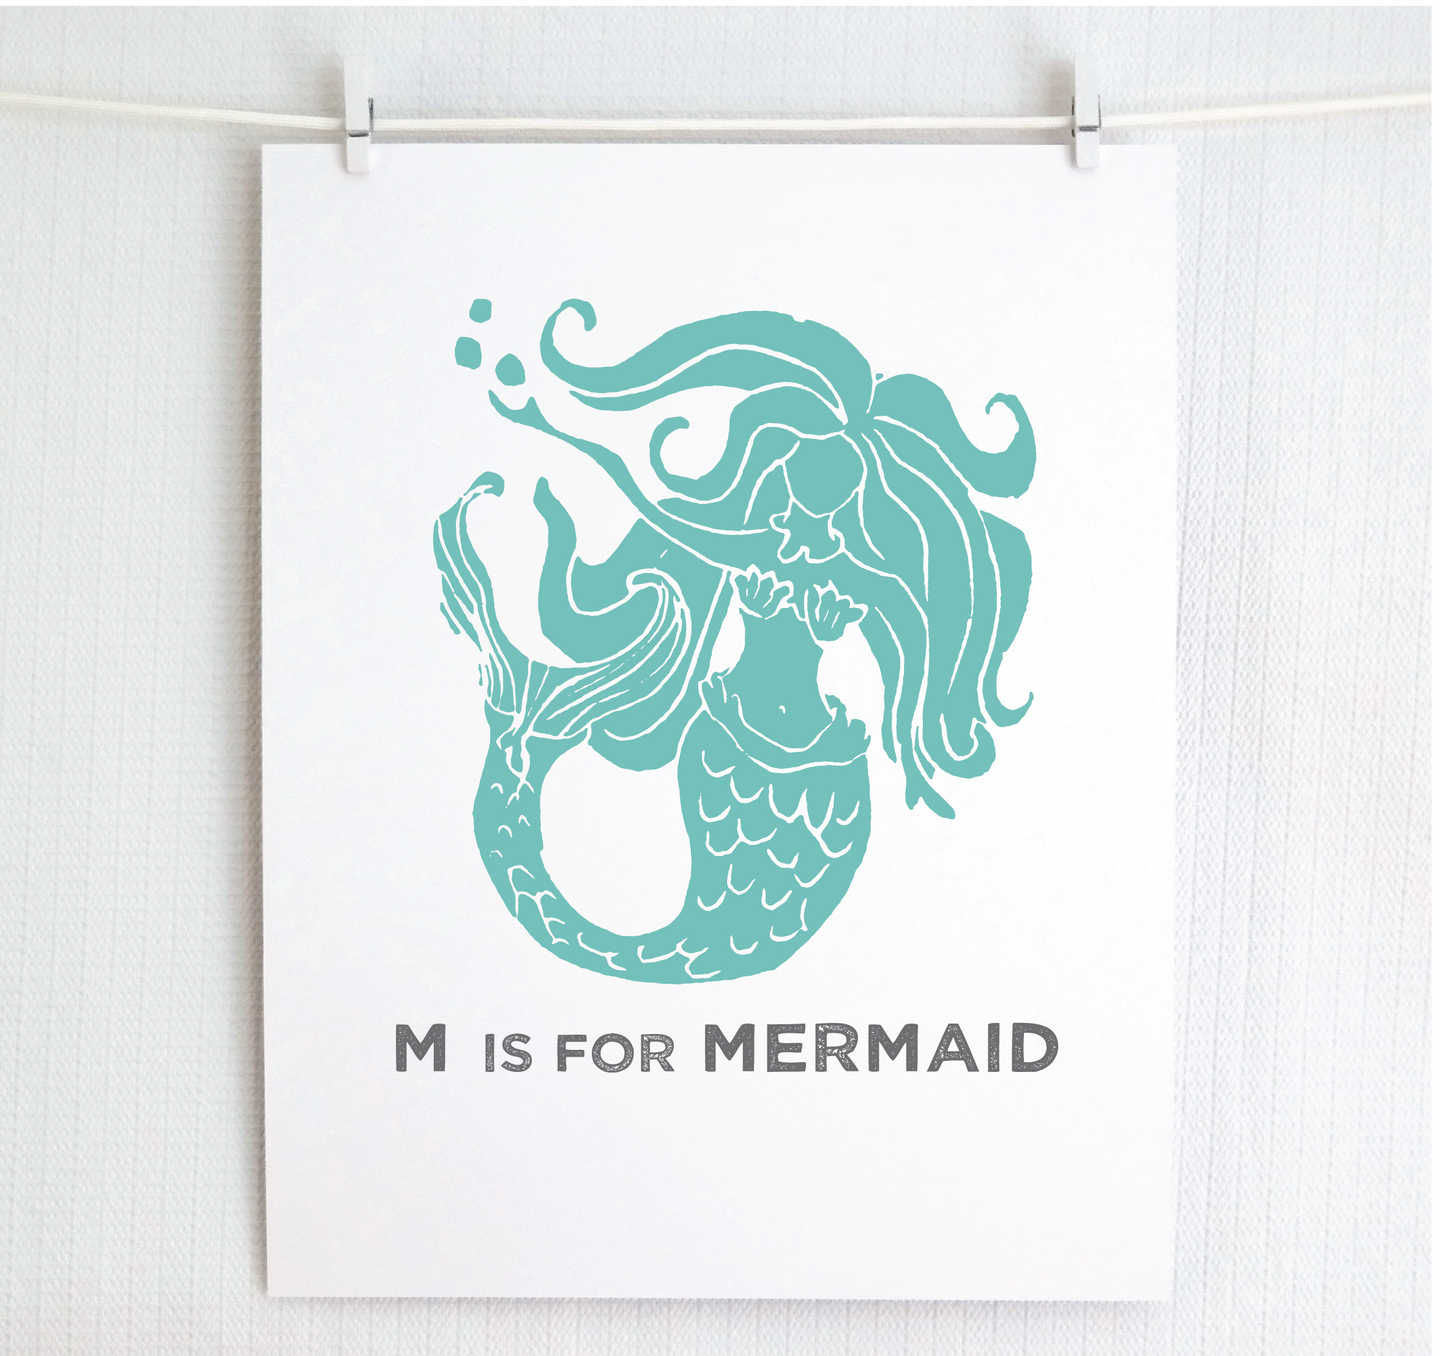 M is for Mermaid (Magical Creatures)